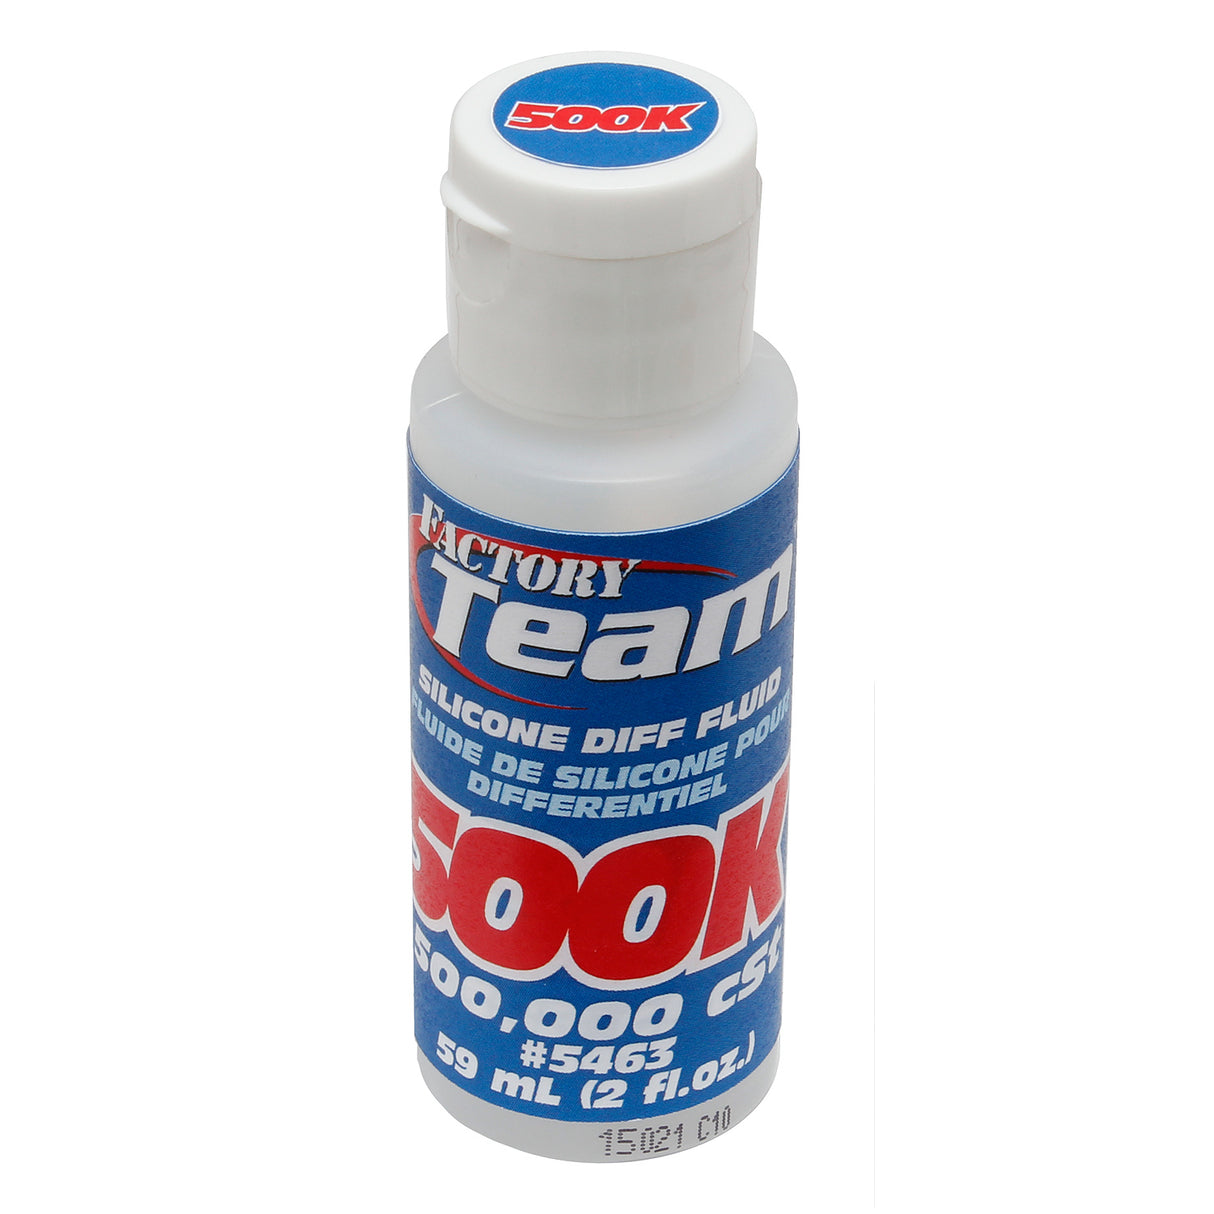 Team Associated Silicone Diff Oil 500000Cst 59ml